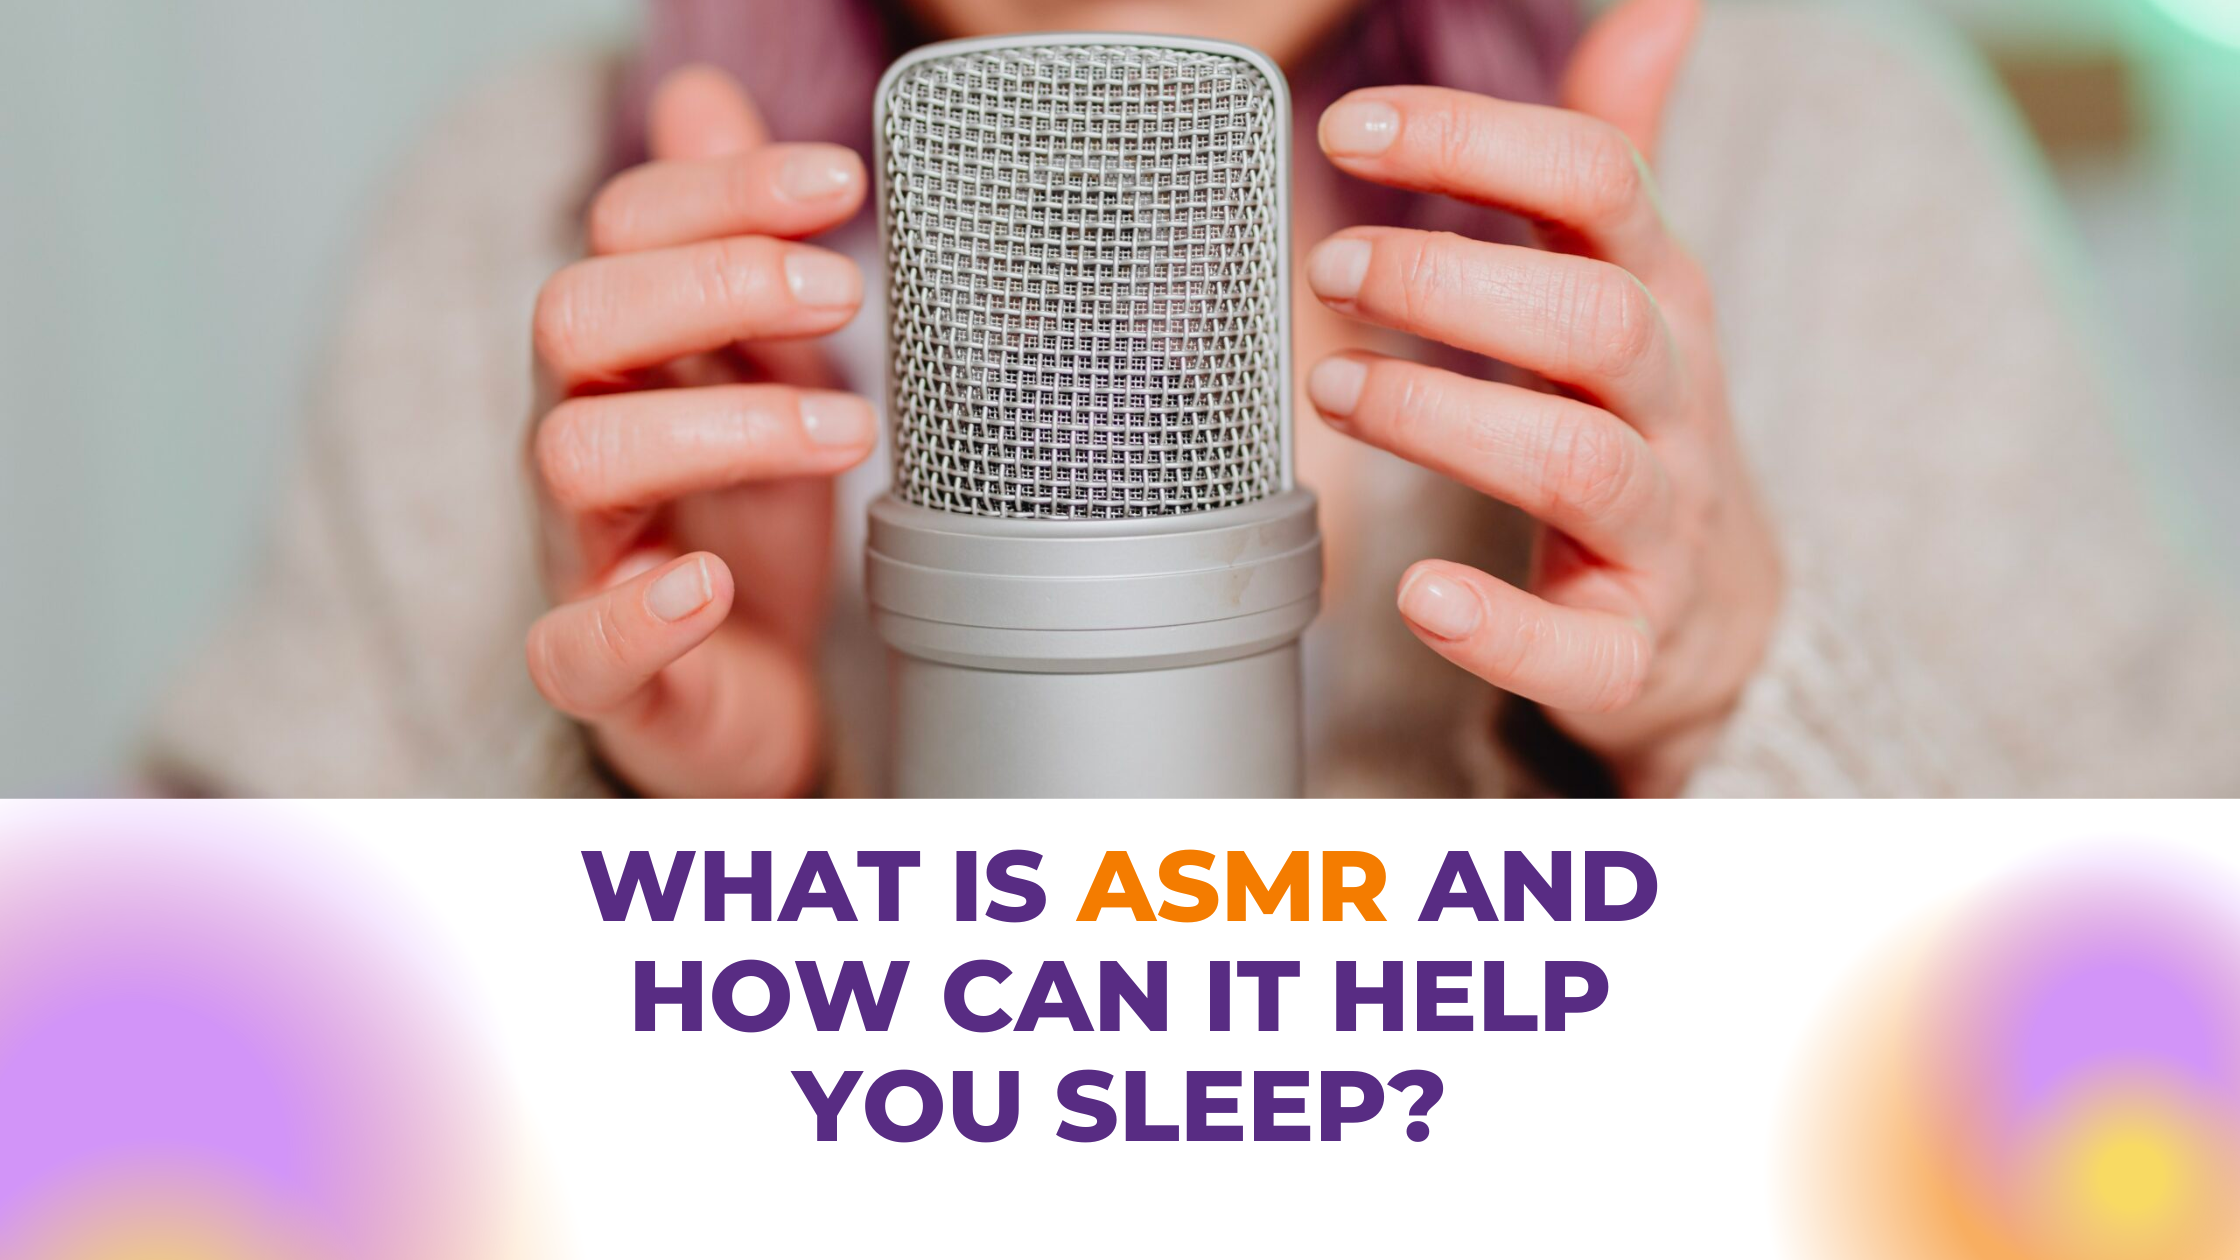 Everything You Need To Know About ASMR and Sleep